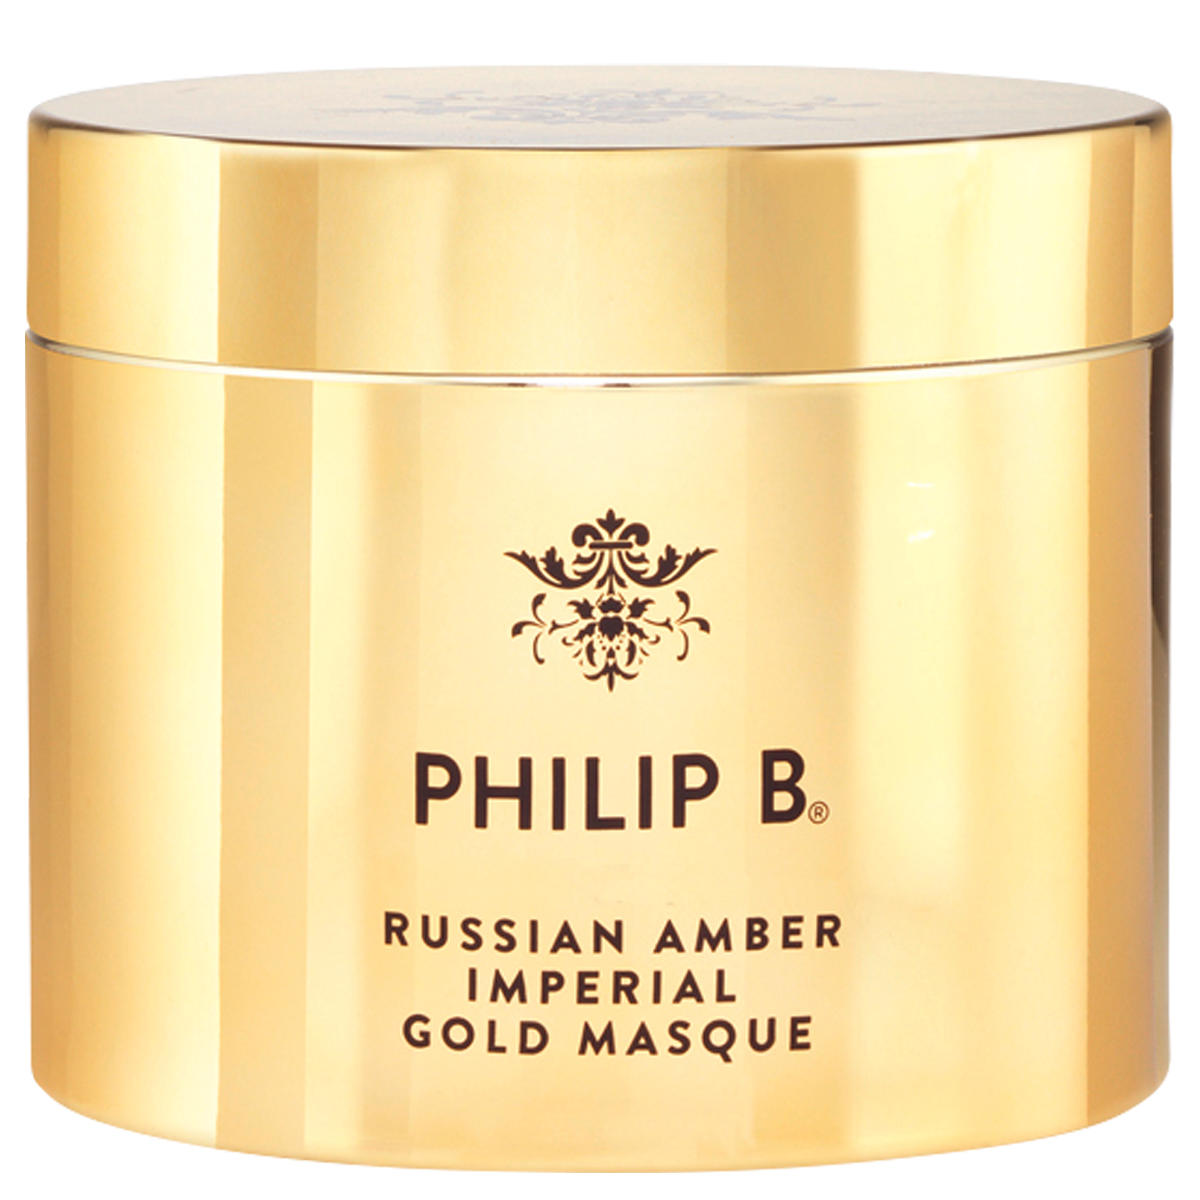 PHILIP B RUSSIAN AMBER Imperial Gold Masque 236 ml - 1